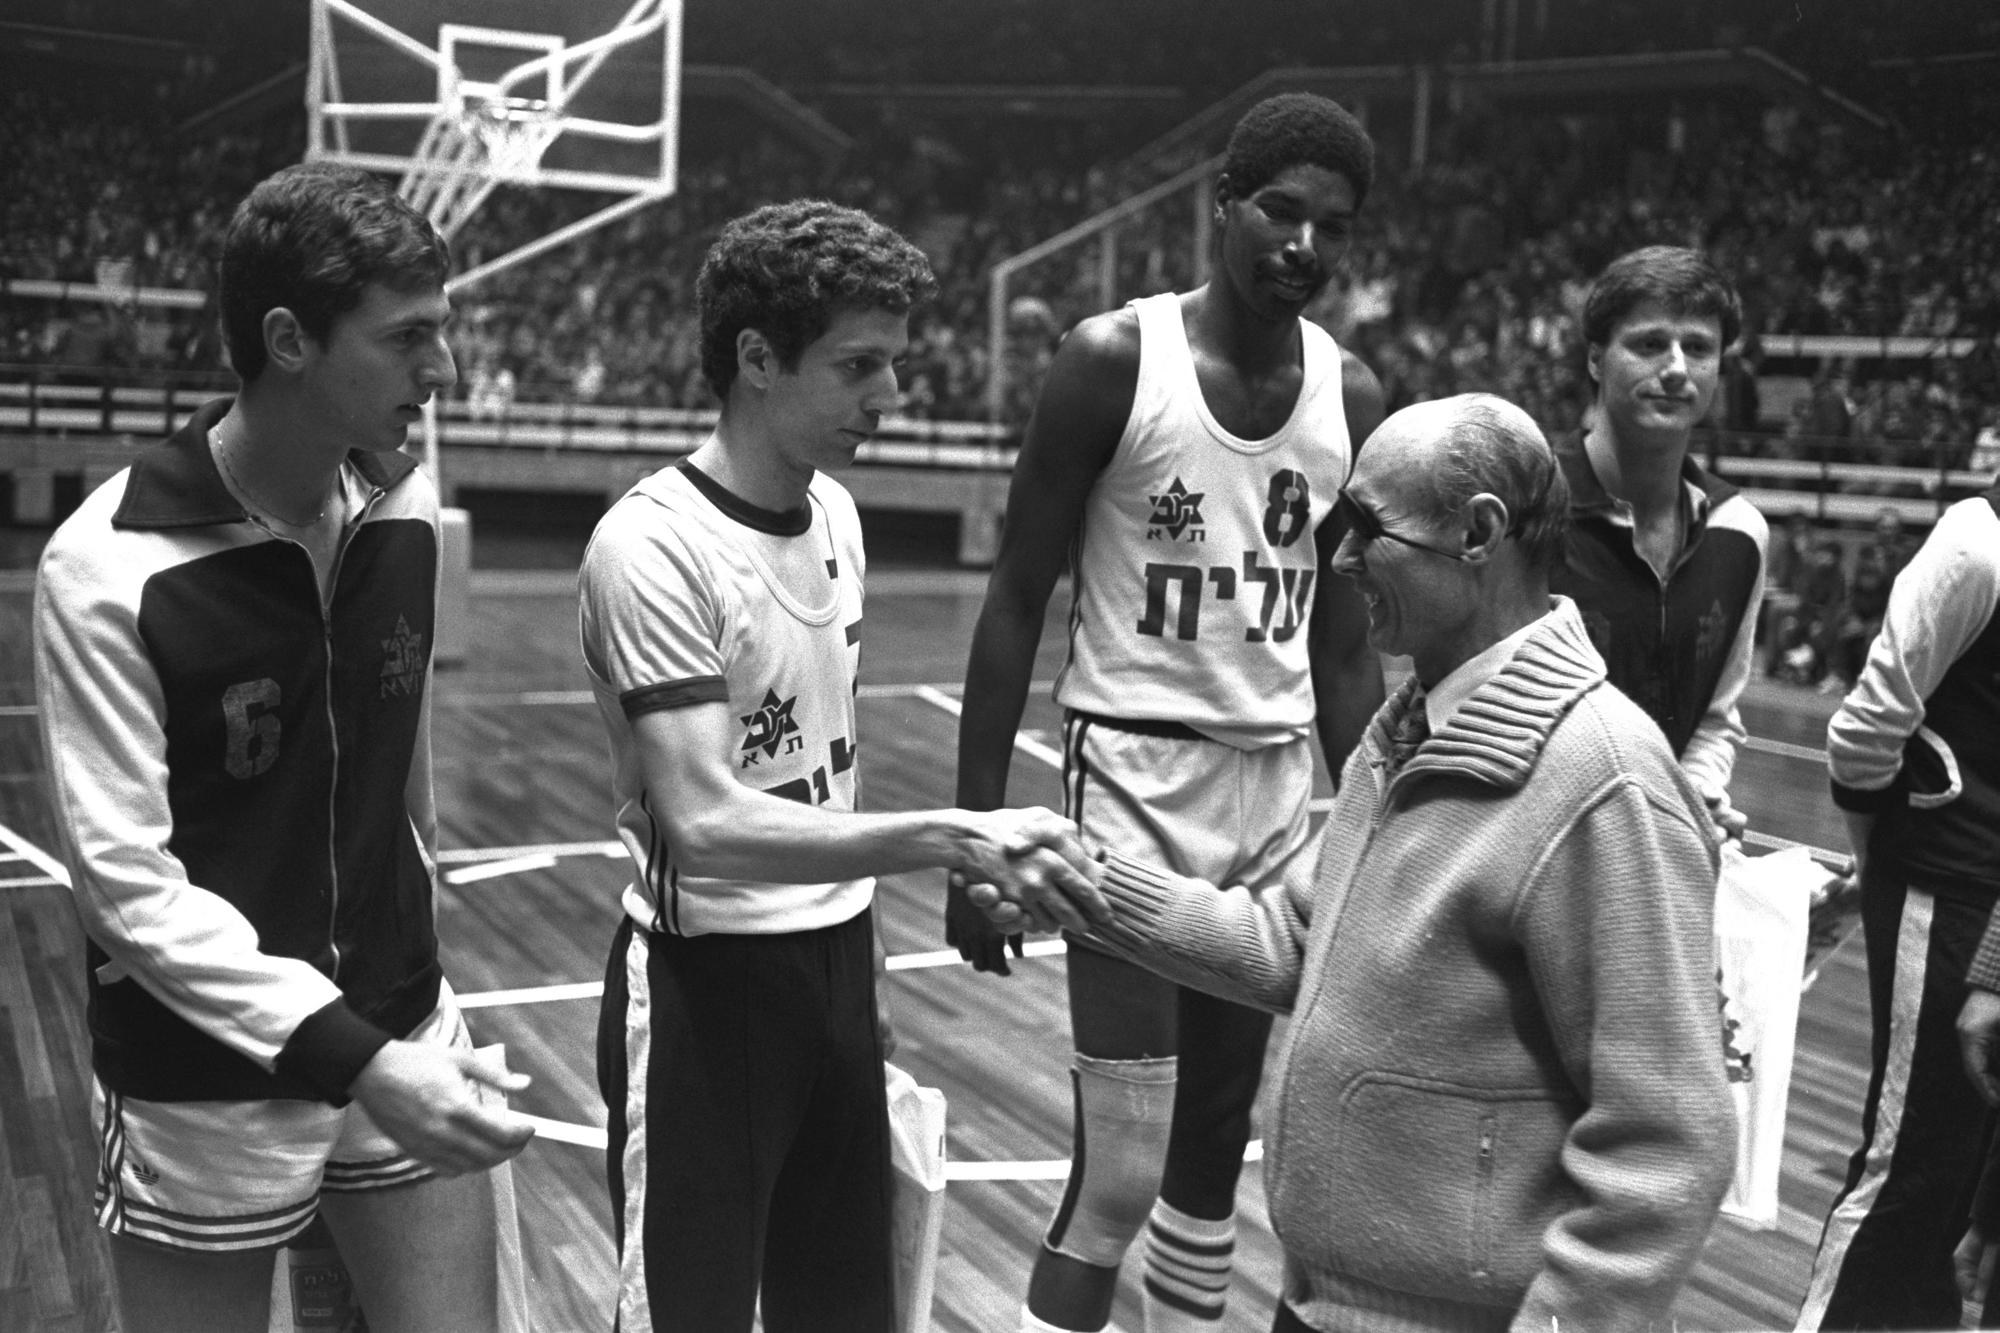 Israel’s Defense Minister, Moshe Dayan, shakes hands with Maccabi Tel Aviv players.